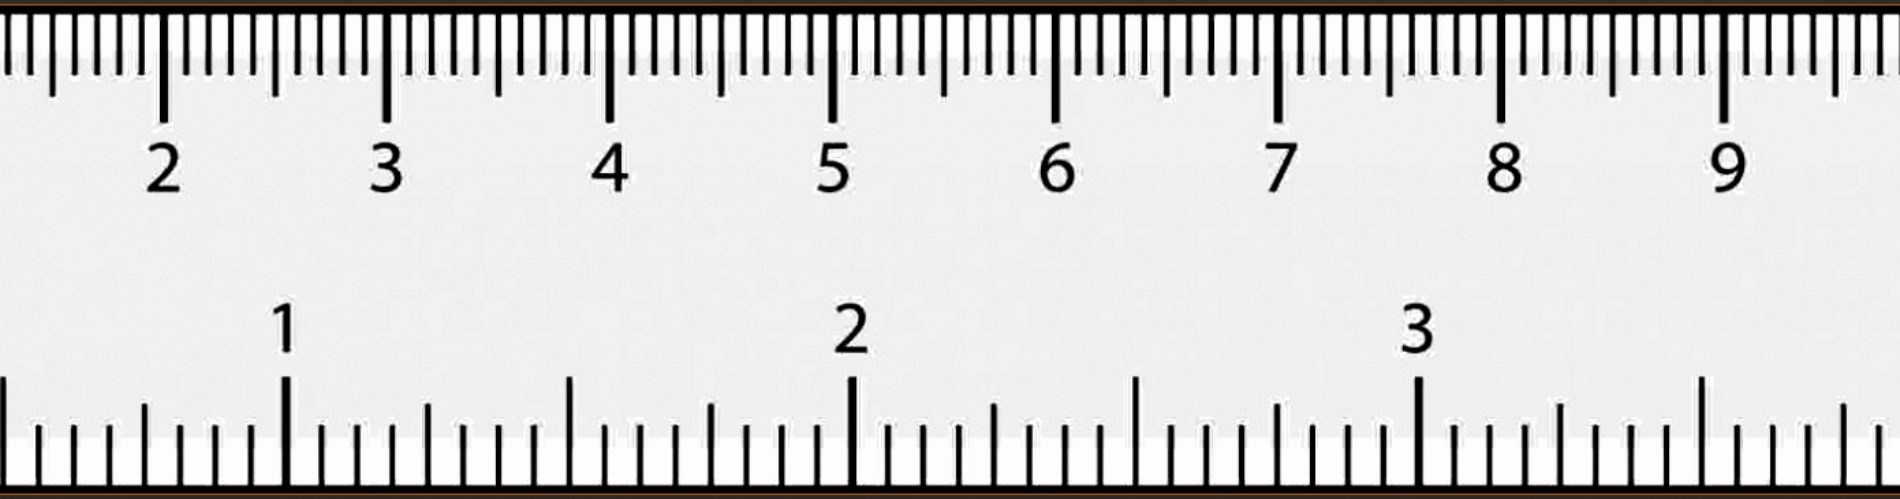 ruler in inches